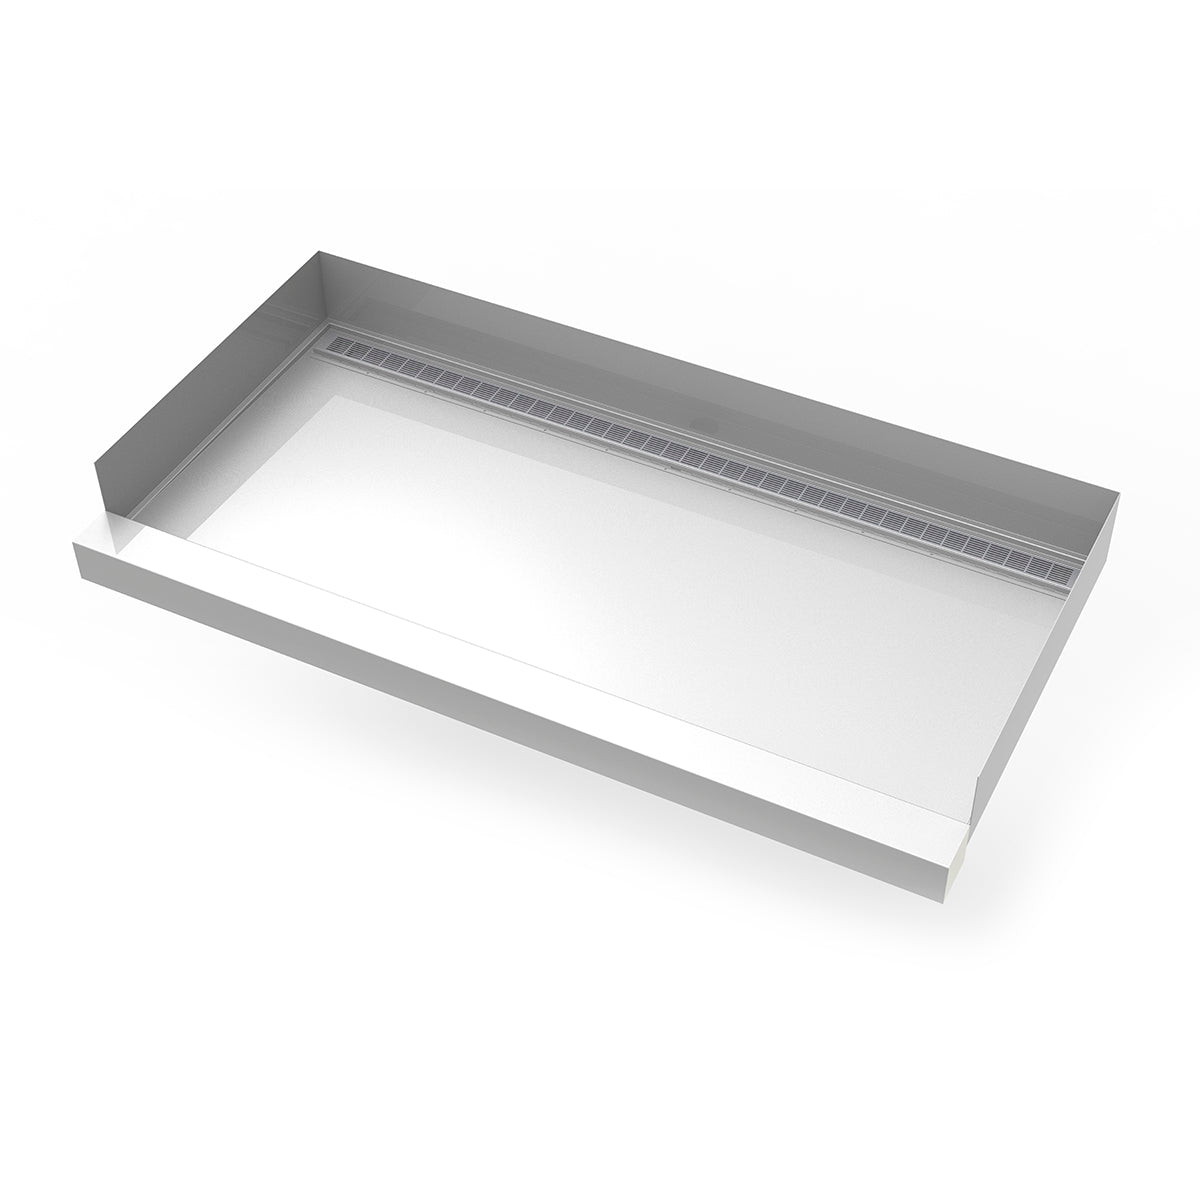 Infinity Drain 30"x 60" Stainless Steel Shower Base with Back Wall Slotted Pattern Linear Drain location